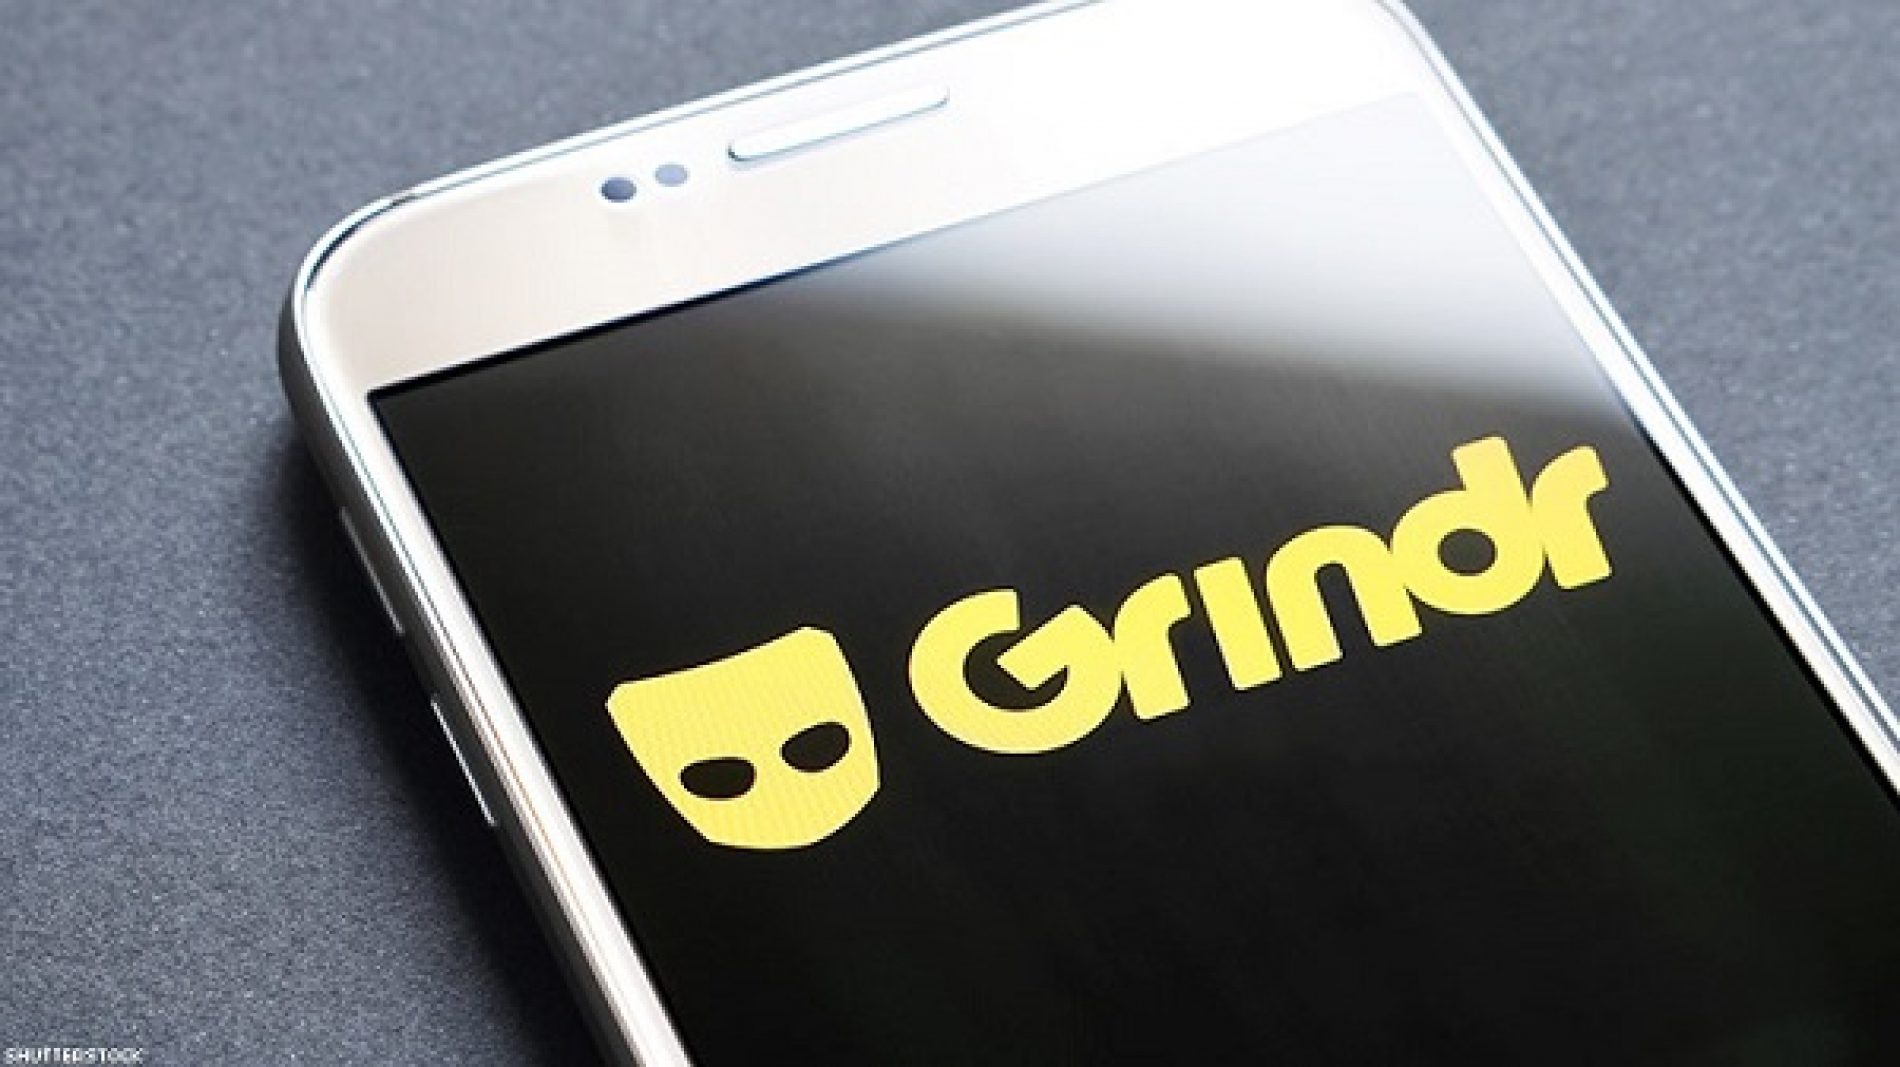 So It Looks Like Straight People Are Appropriating Grindr